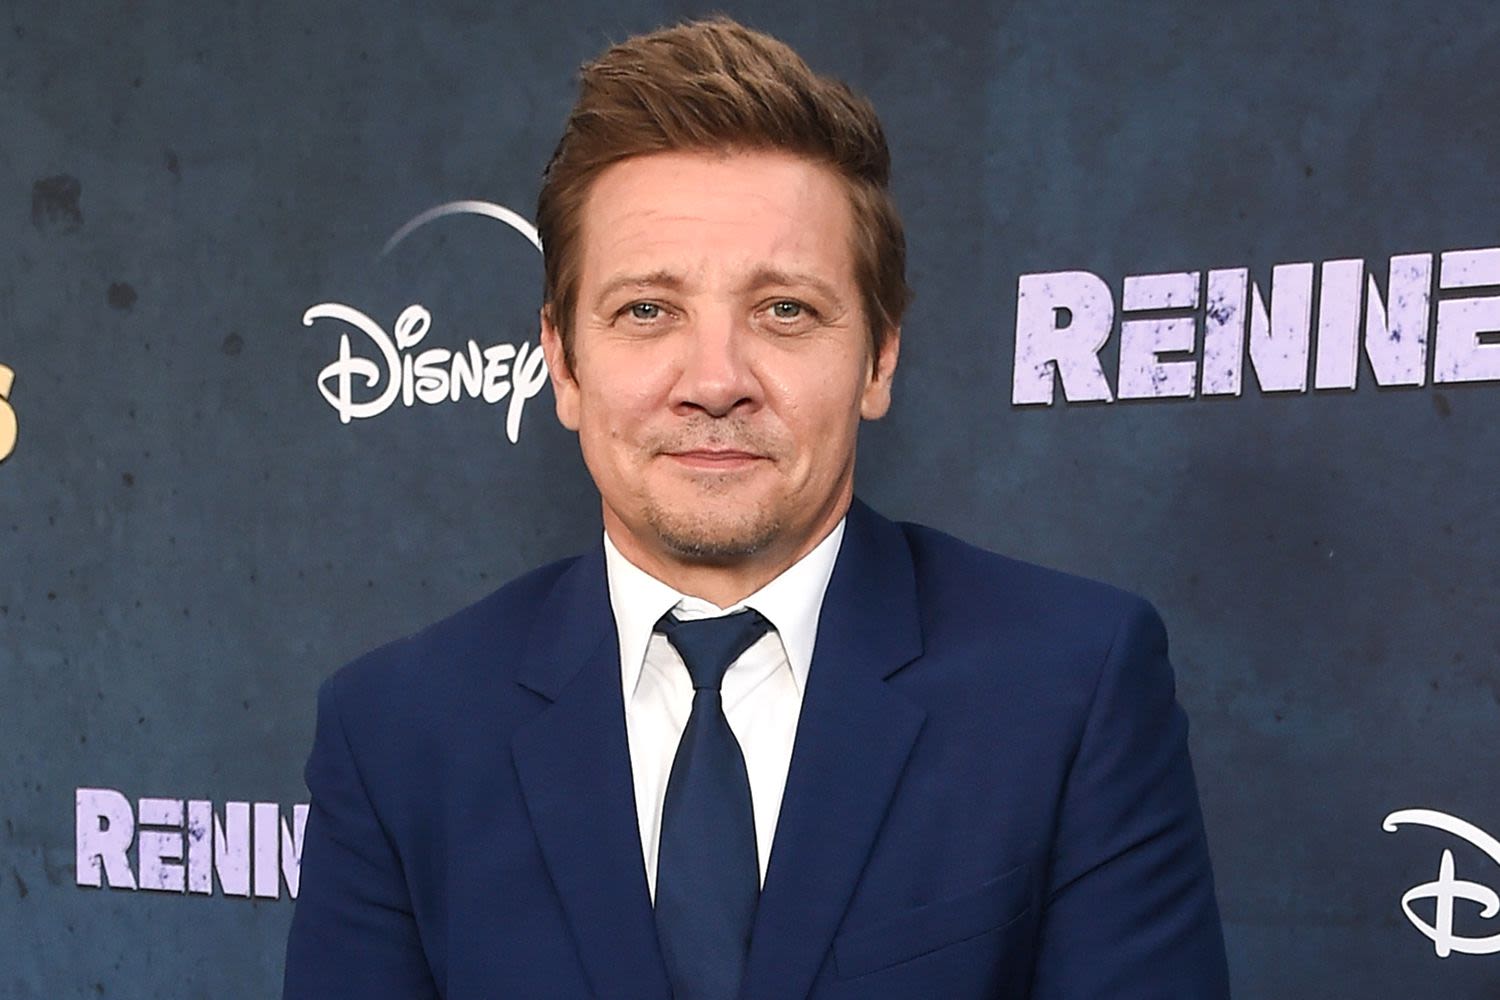 Jeremy Renner Reveals Why He 'Had to Leave' the “Mission: Impossible” Franchise